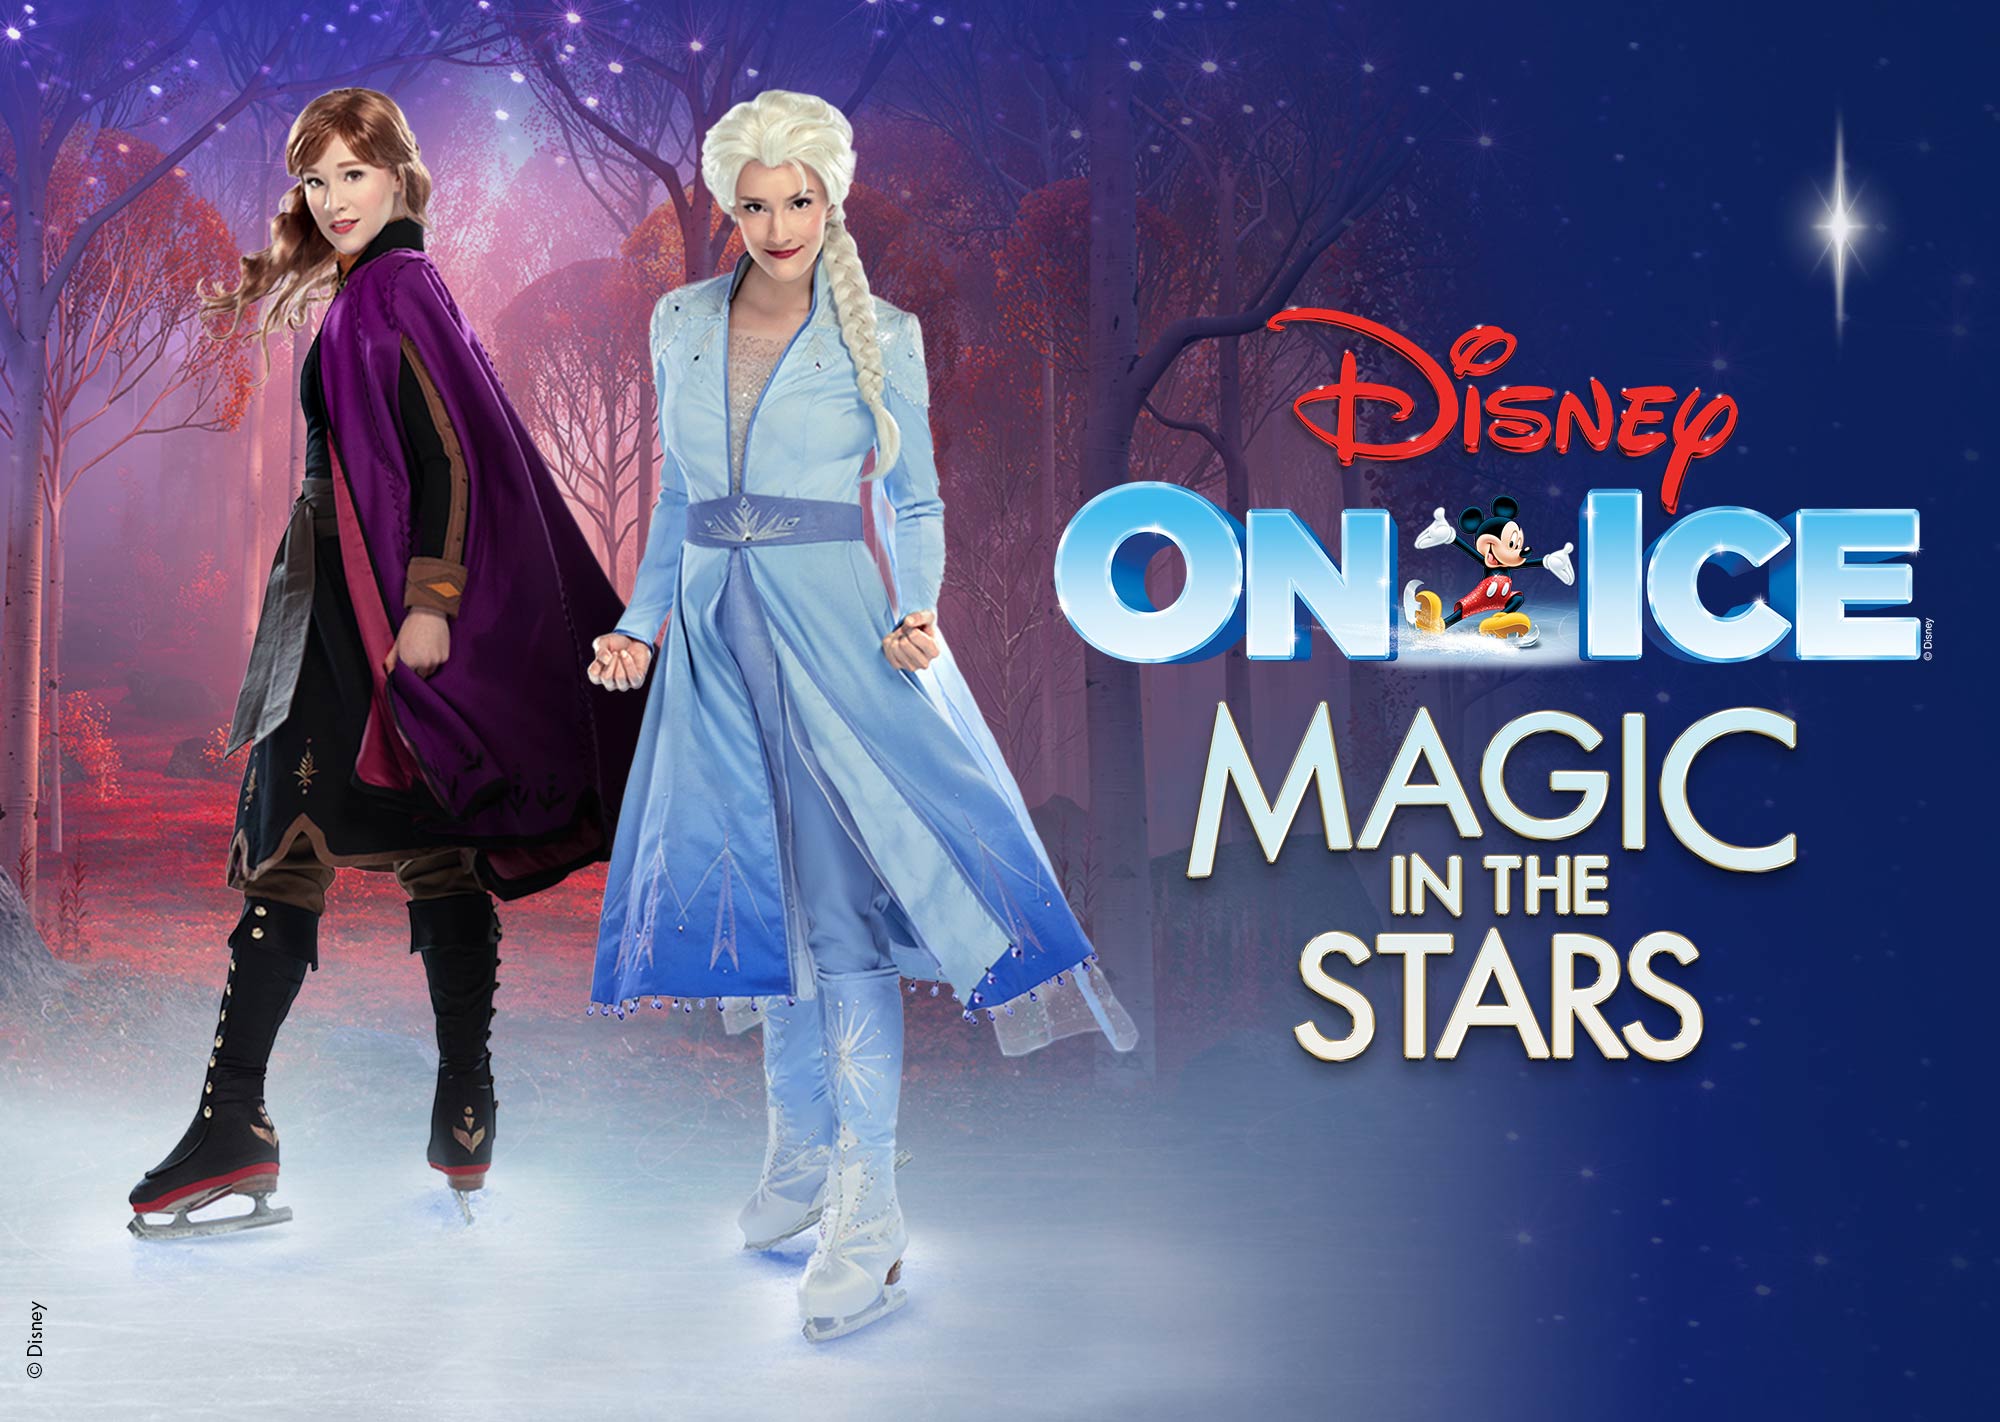 Disney on Ice presents Magic in the Stars at H-E-B Center May 9-12, 2024!